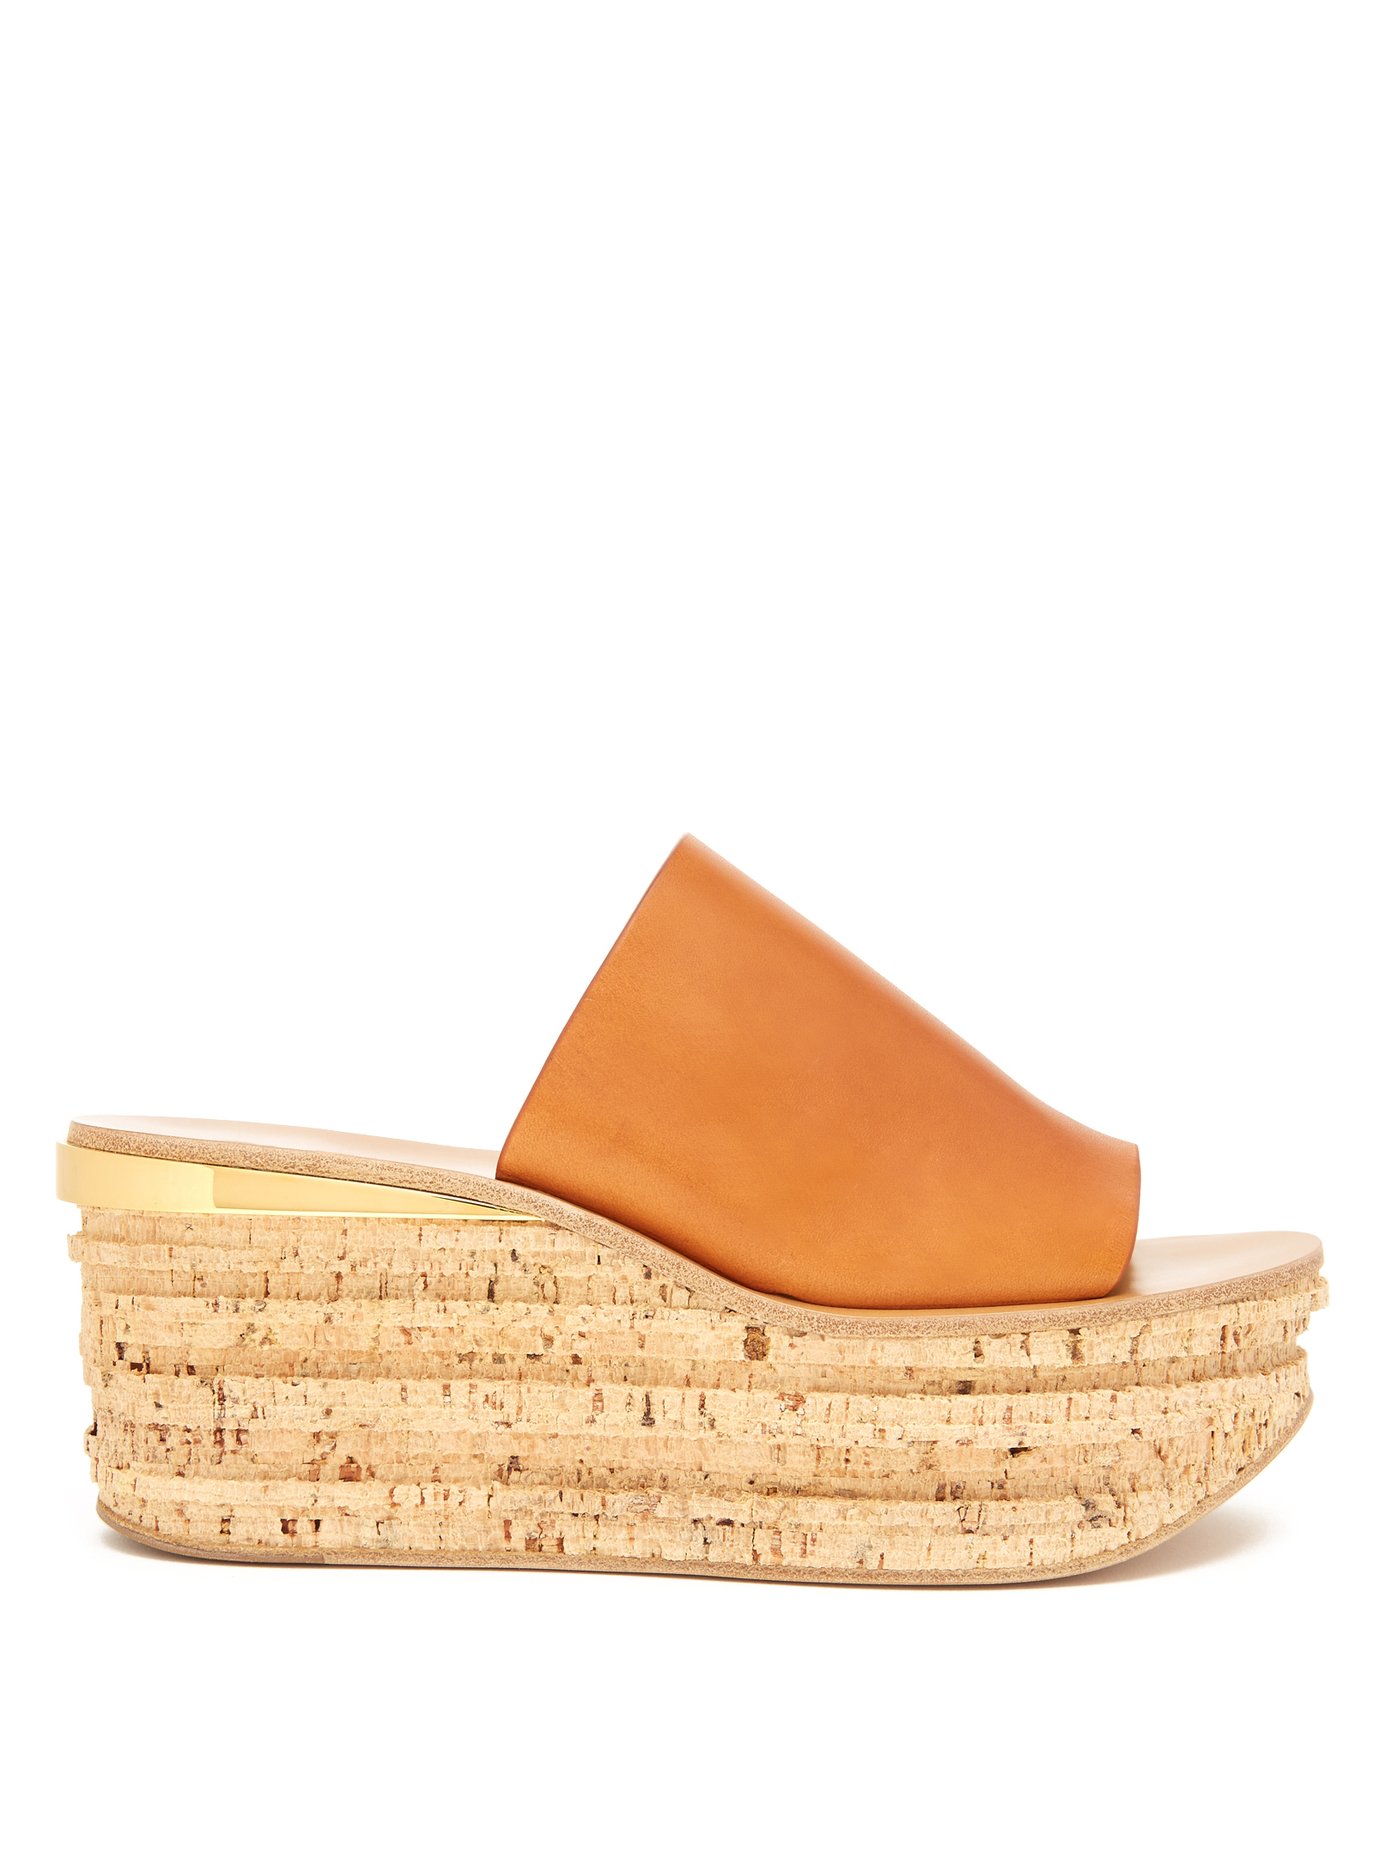 leather wedge mules